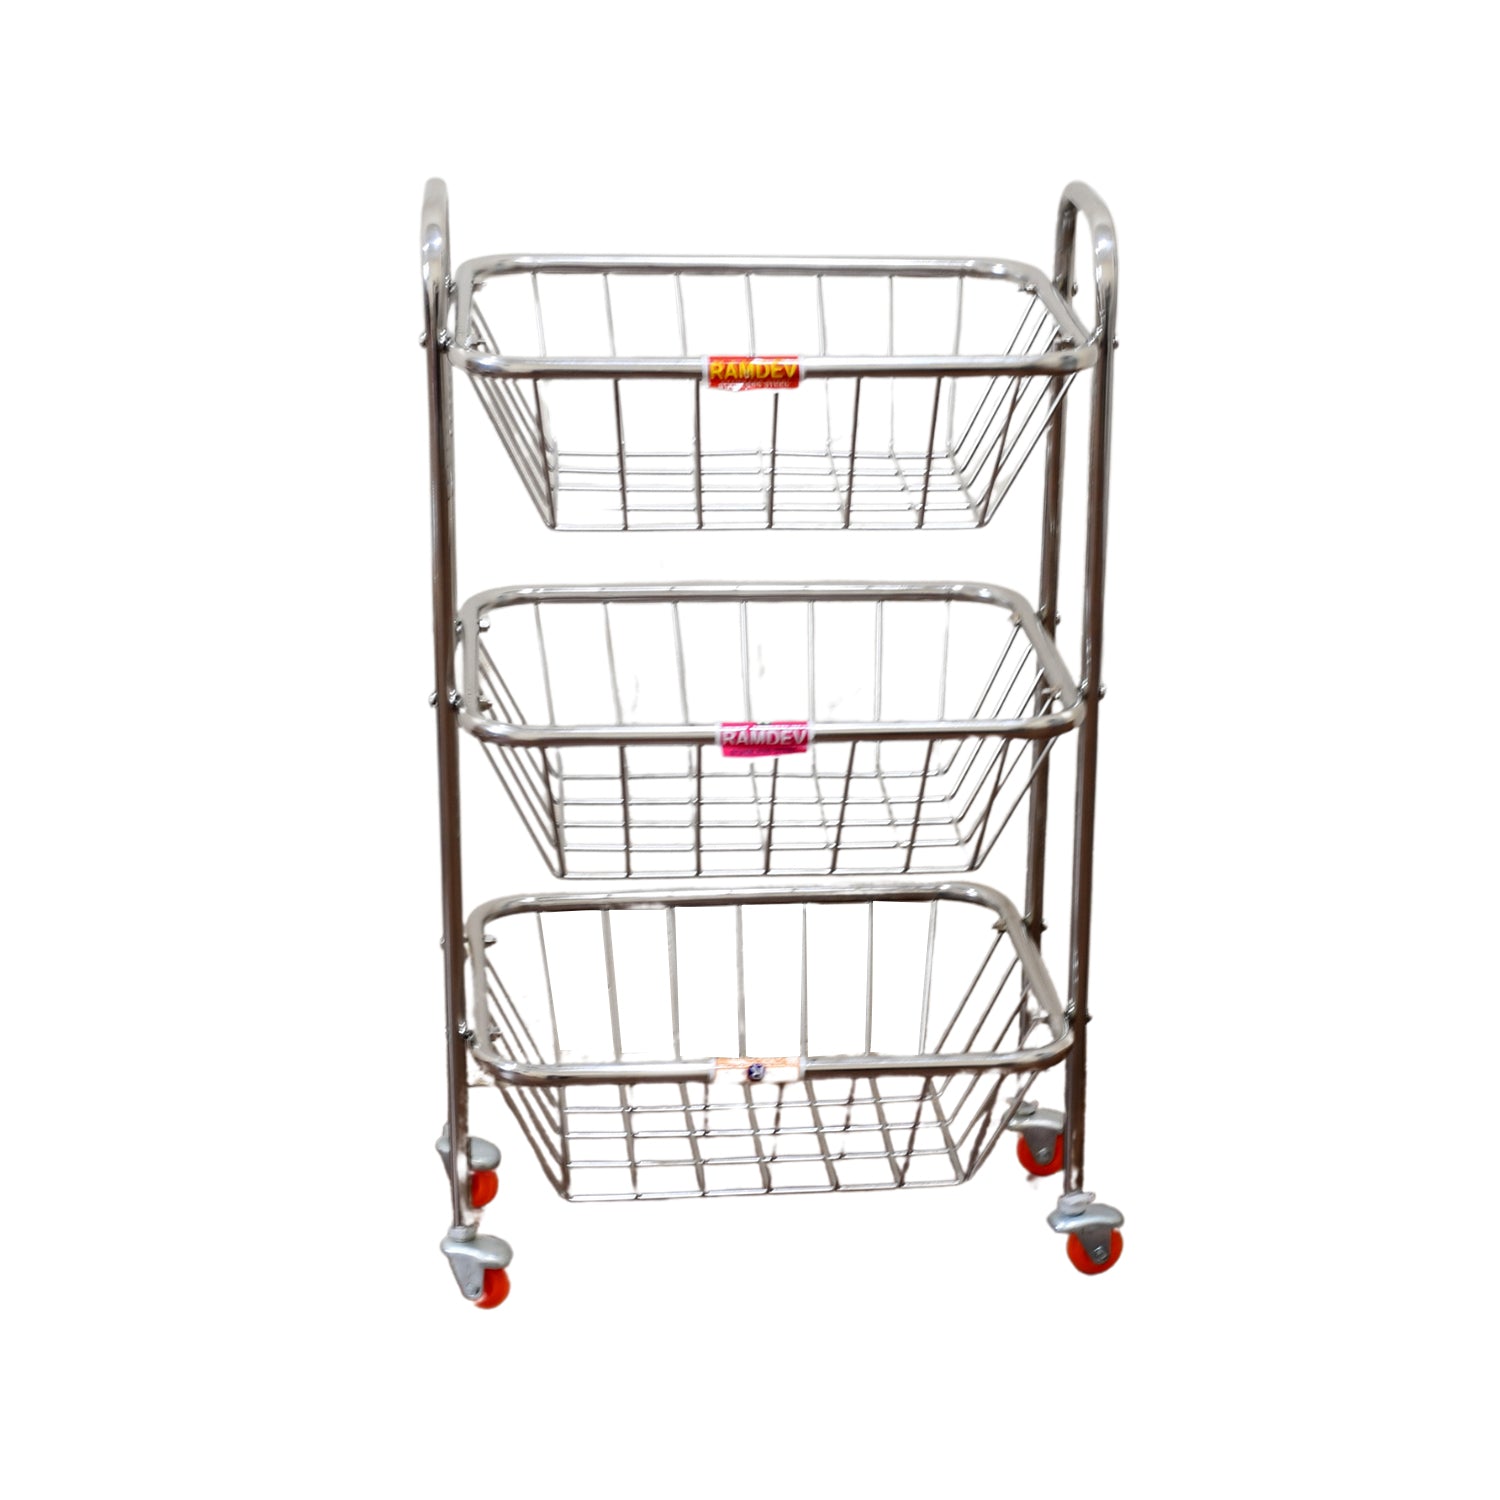 5981 Multipurpose 3 Layer Stainless Steel Fruit & Vegetable 4 Stand Kitchen Trolley |Fruit Basket |Vegetable Basket |Onion Potato Rack For Kitchen |Vegetable Stand For Kitchen